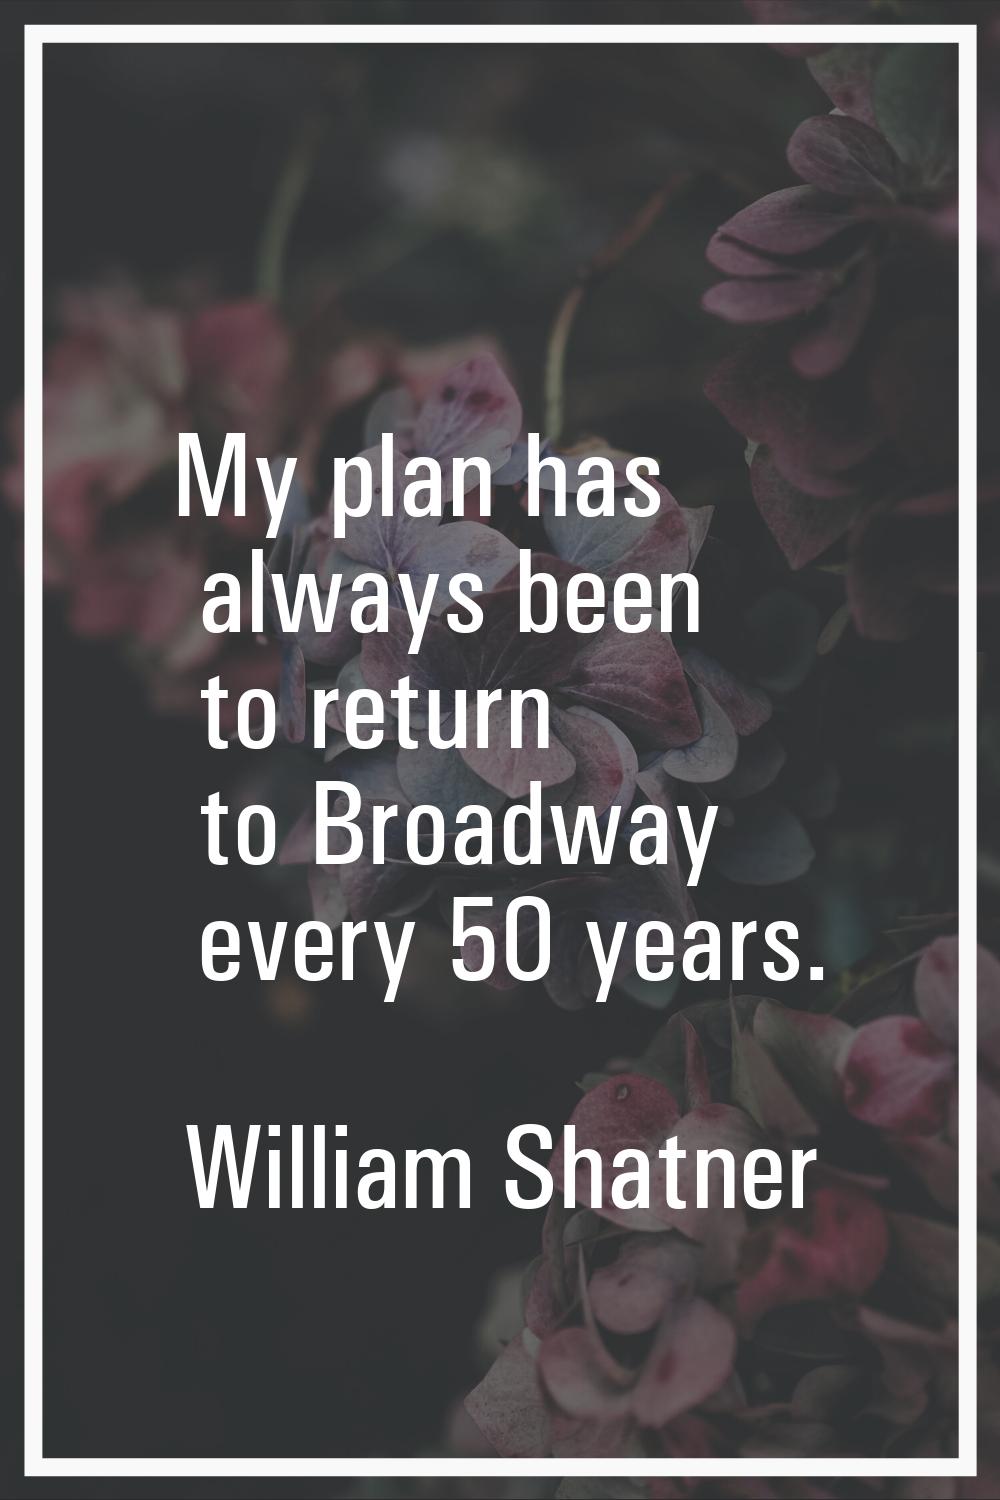 My plan has always been to return to Broadway every 50 years.